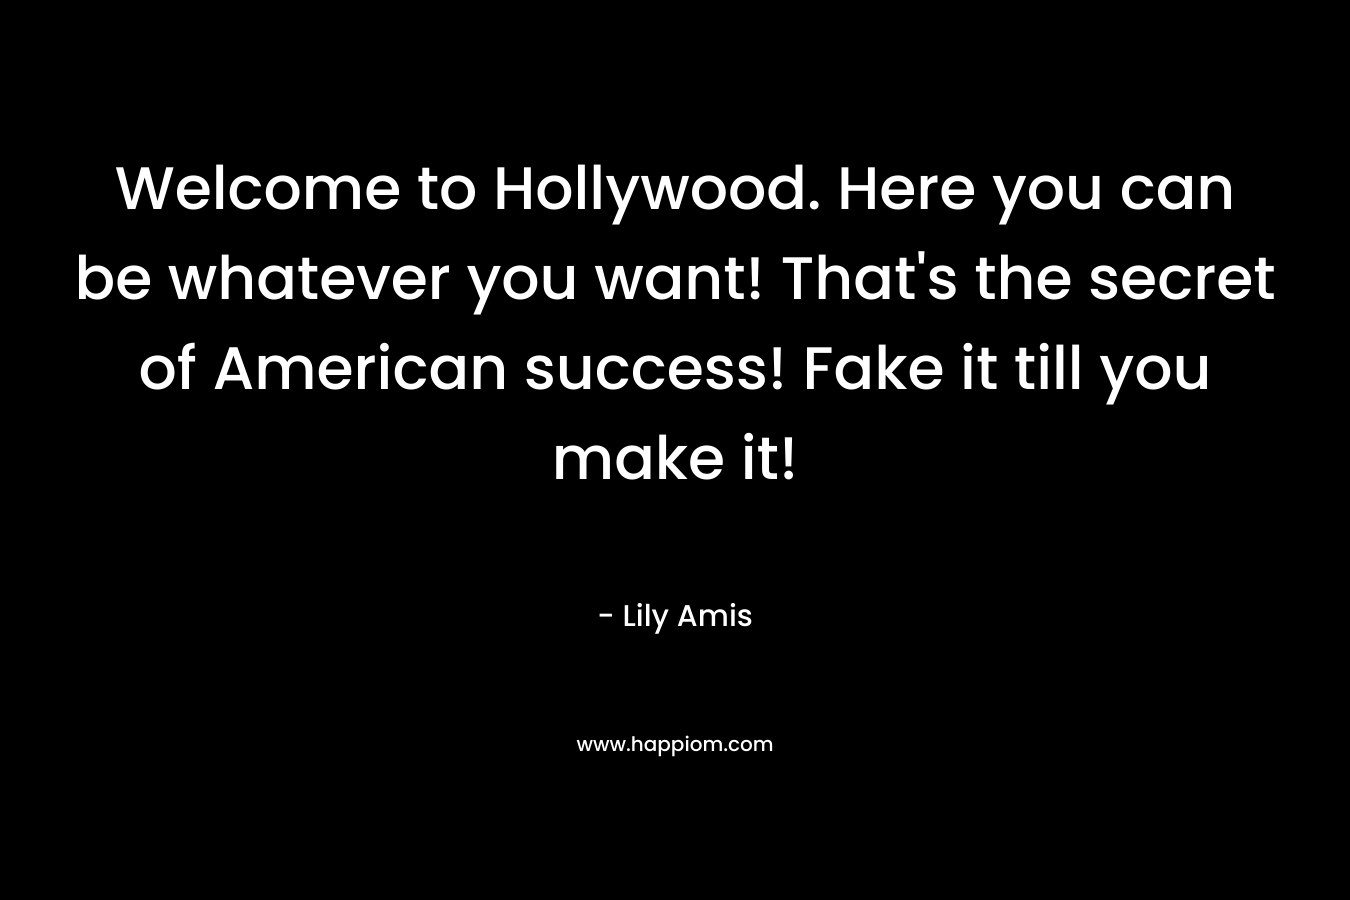 Welcome to Hollywood. Here you can be whatever you want! That’s the secret of American success! Fake it till you make it! – Lily Amis